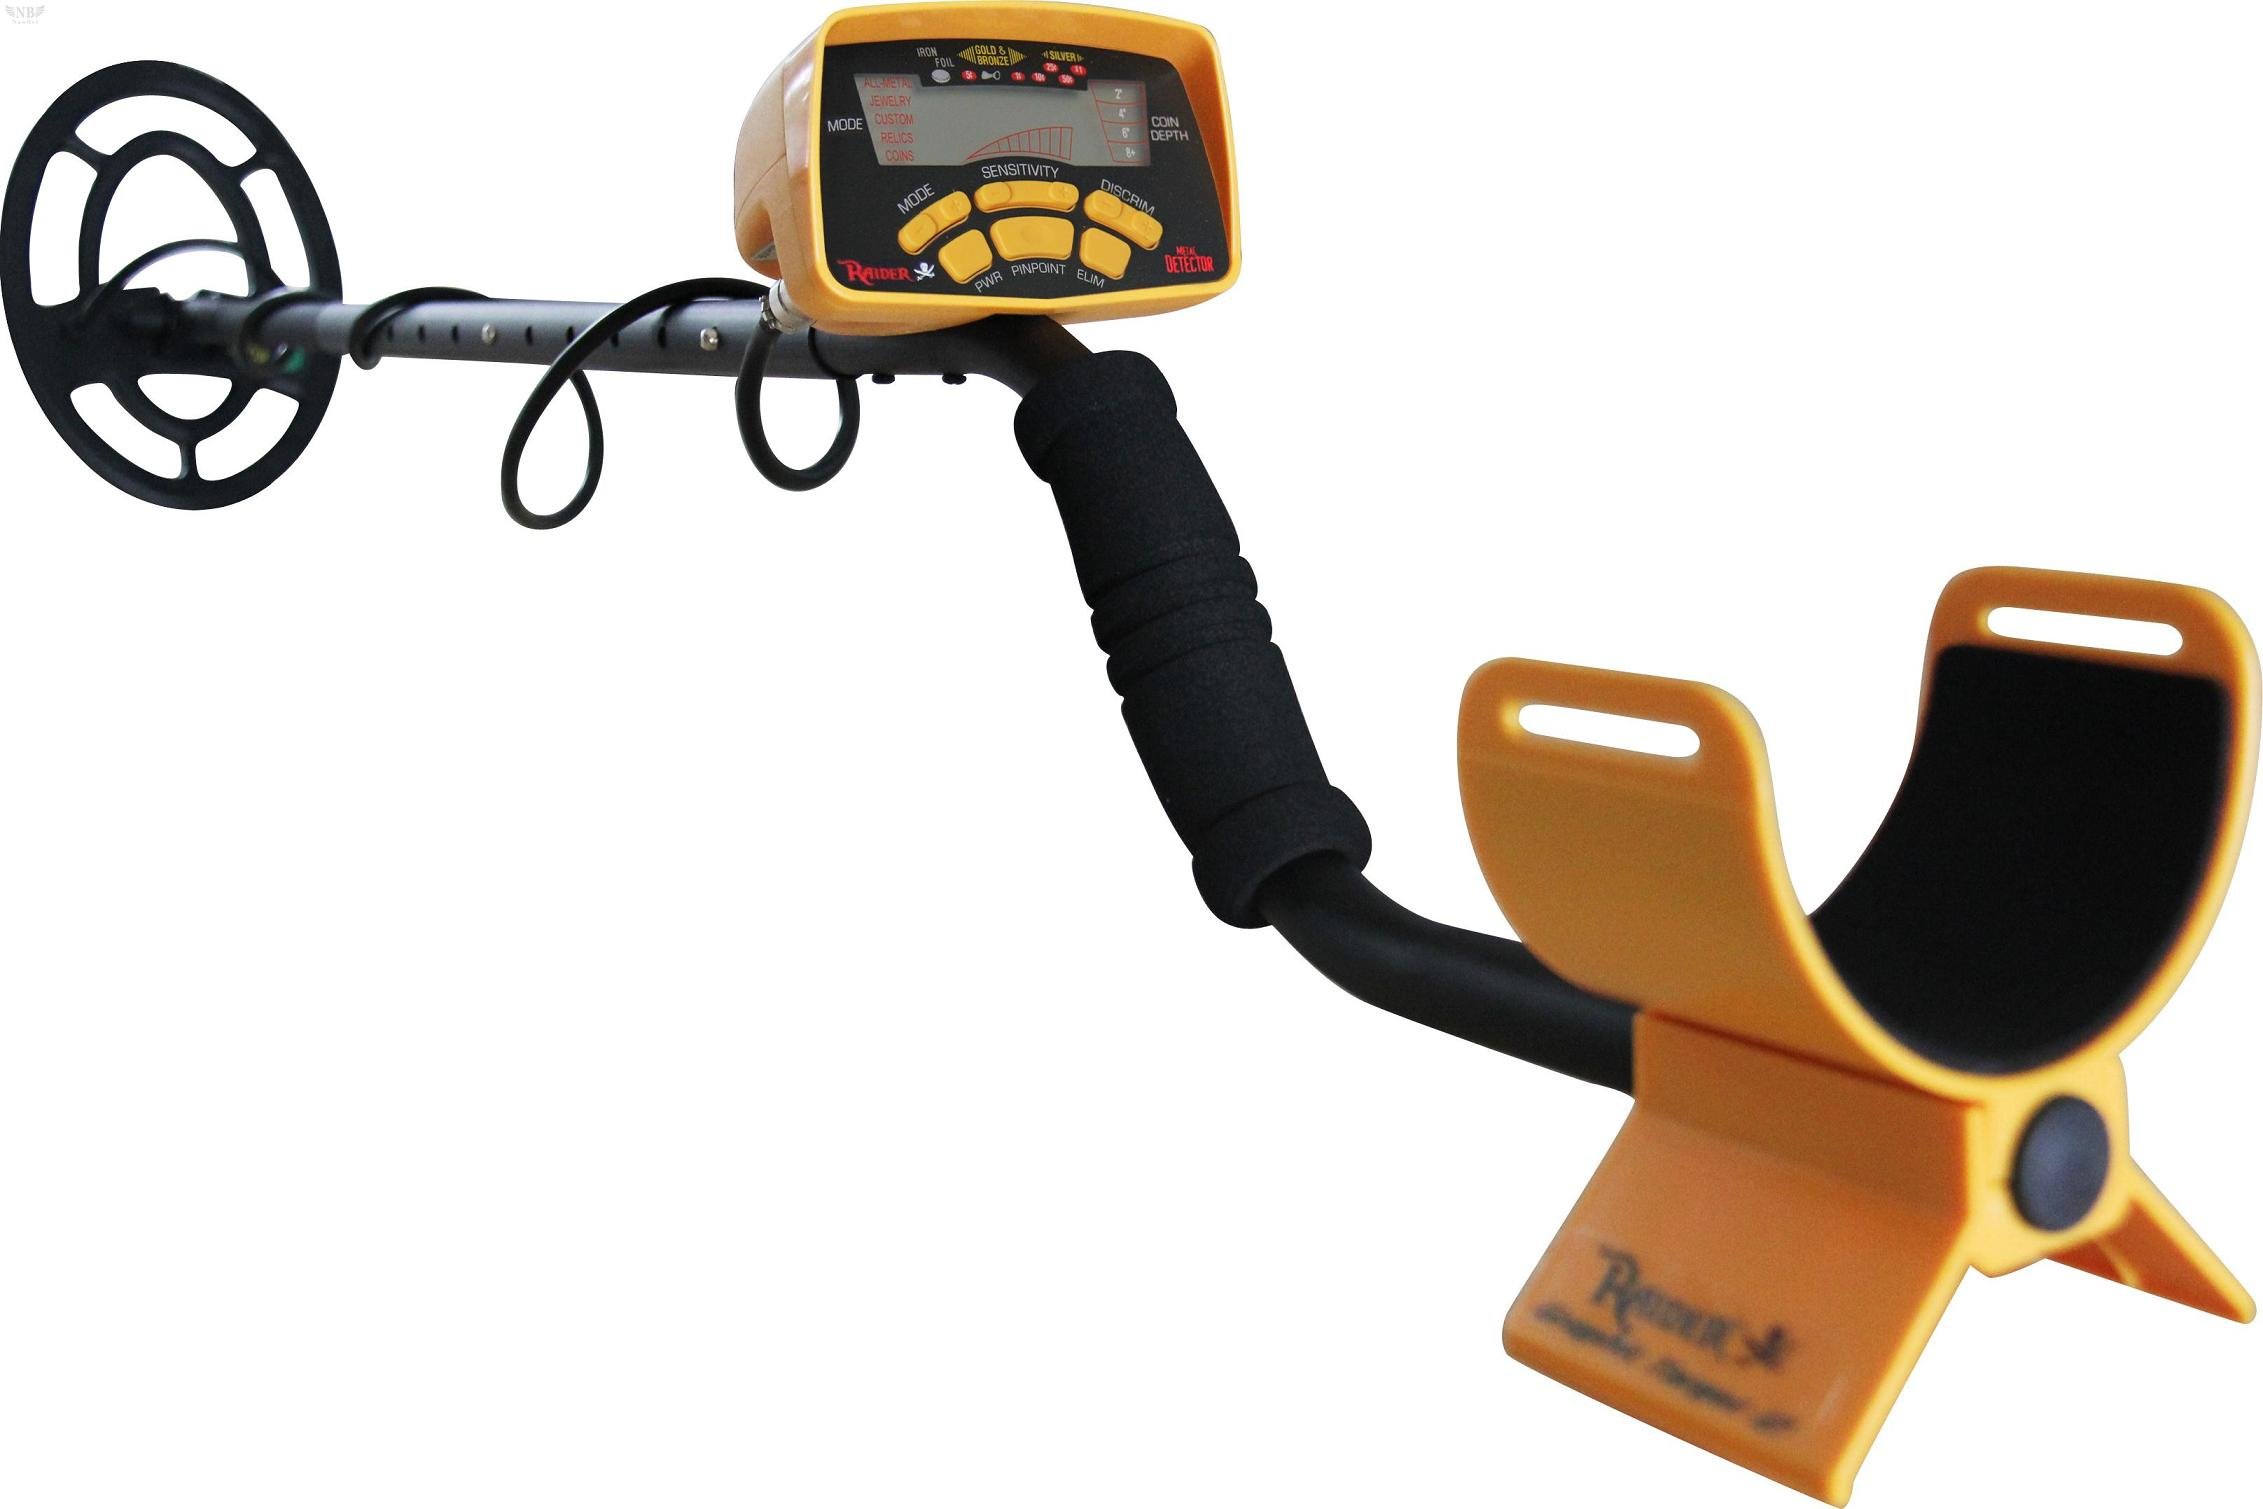 MD-6250 Ground Search Metal Detectors